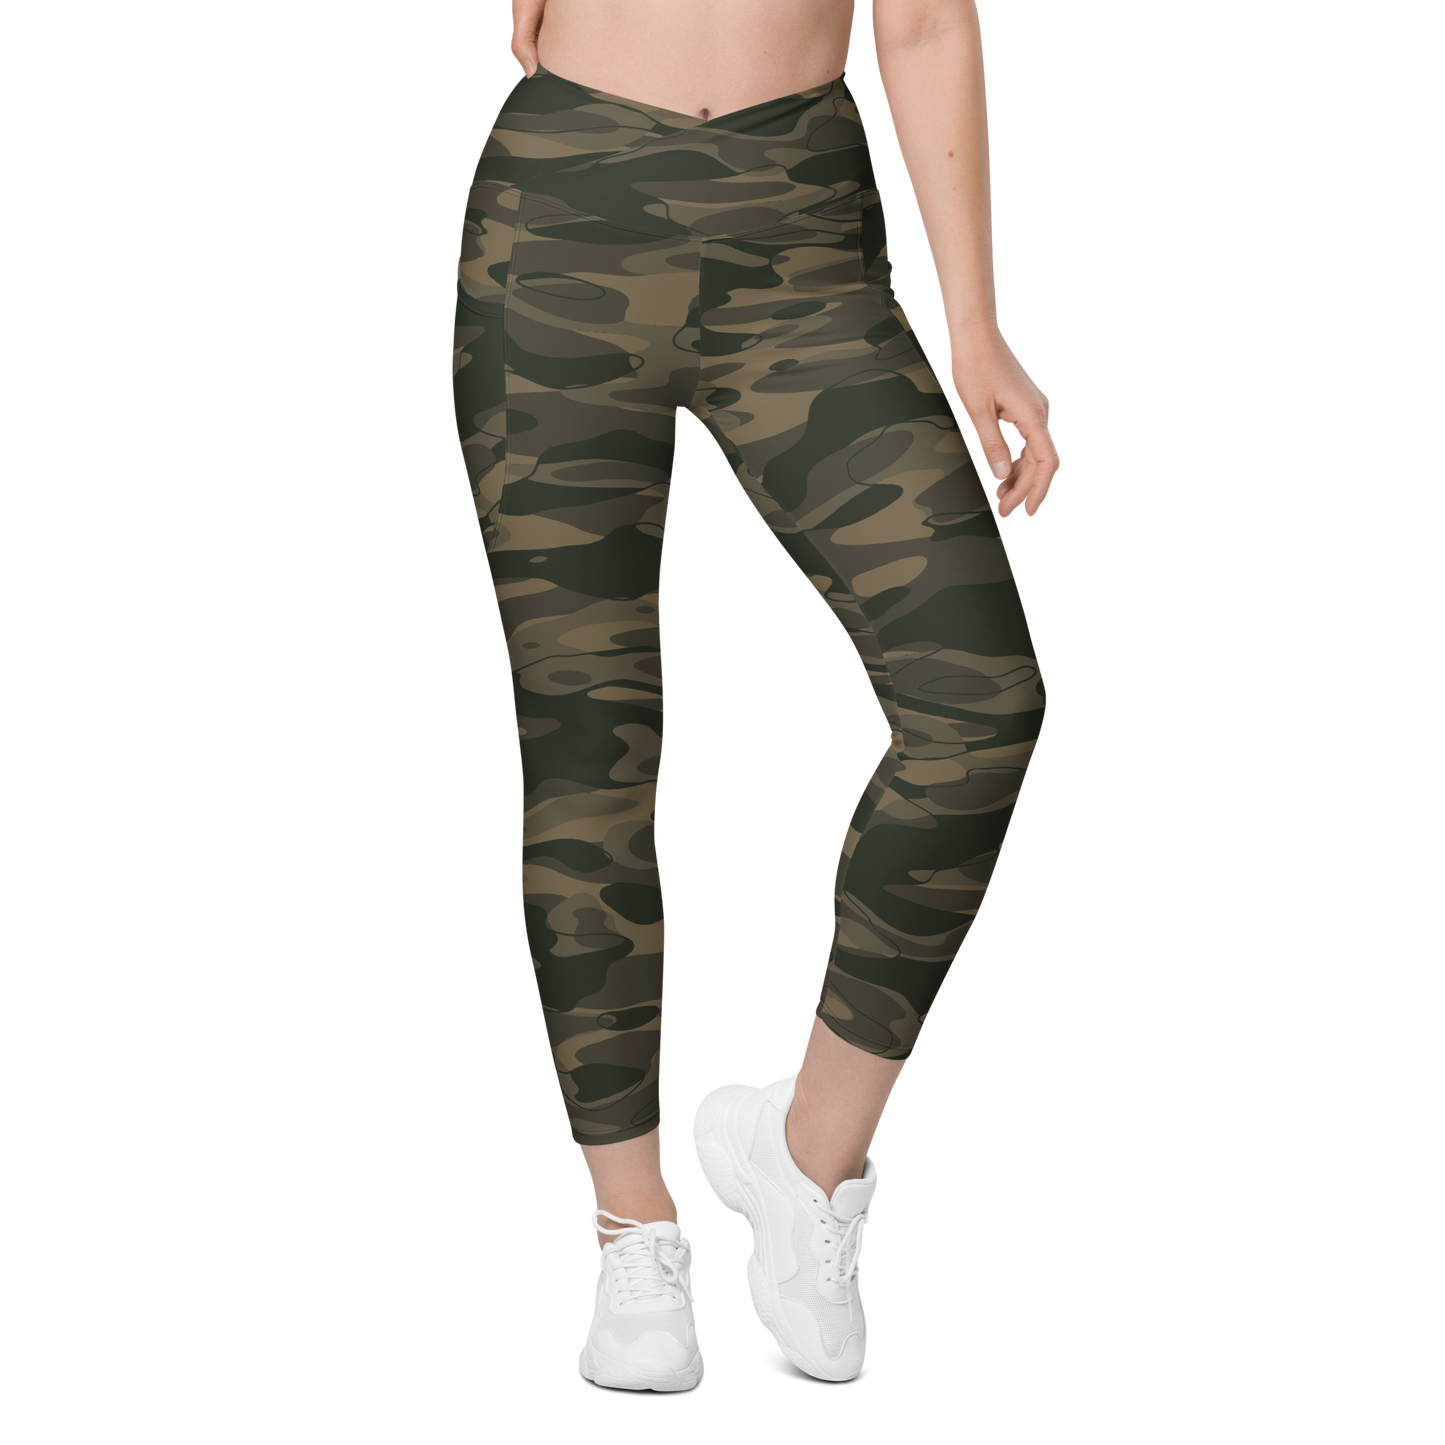 TIDEWAY CLASSIC #A1 CAMOUFLAGE CROSSOVER LEGGING